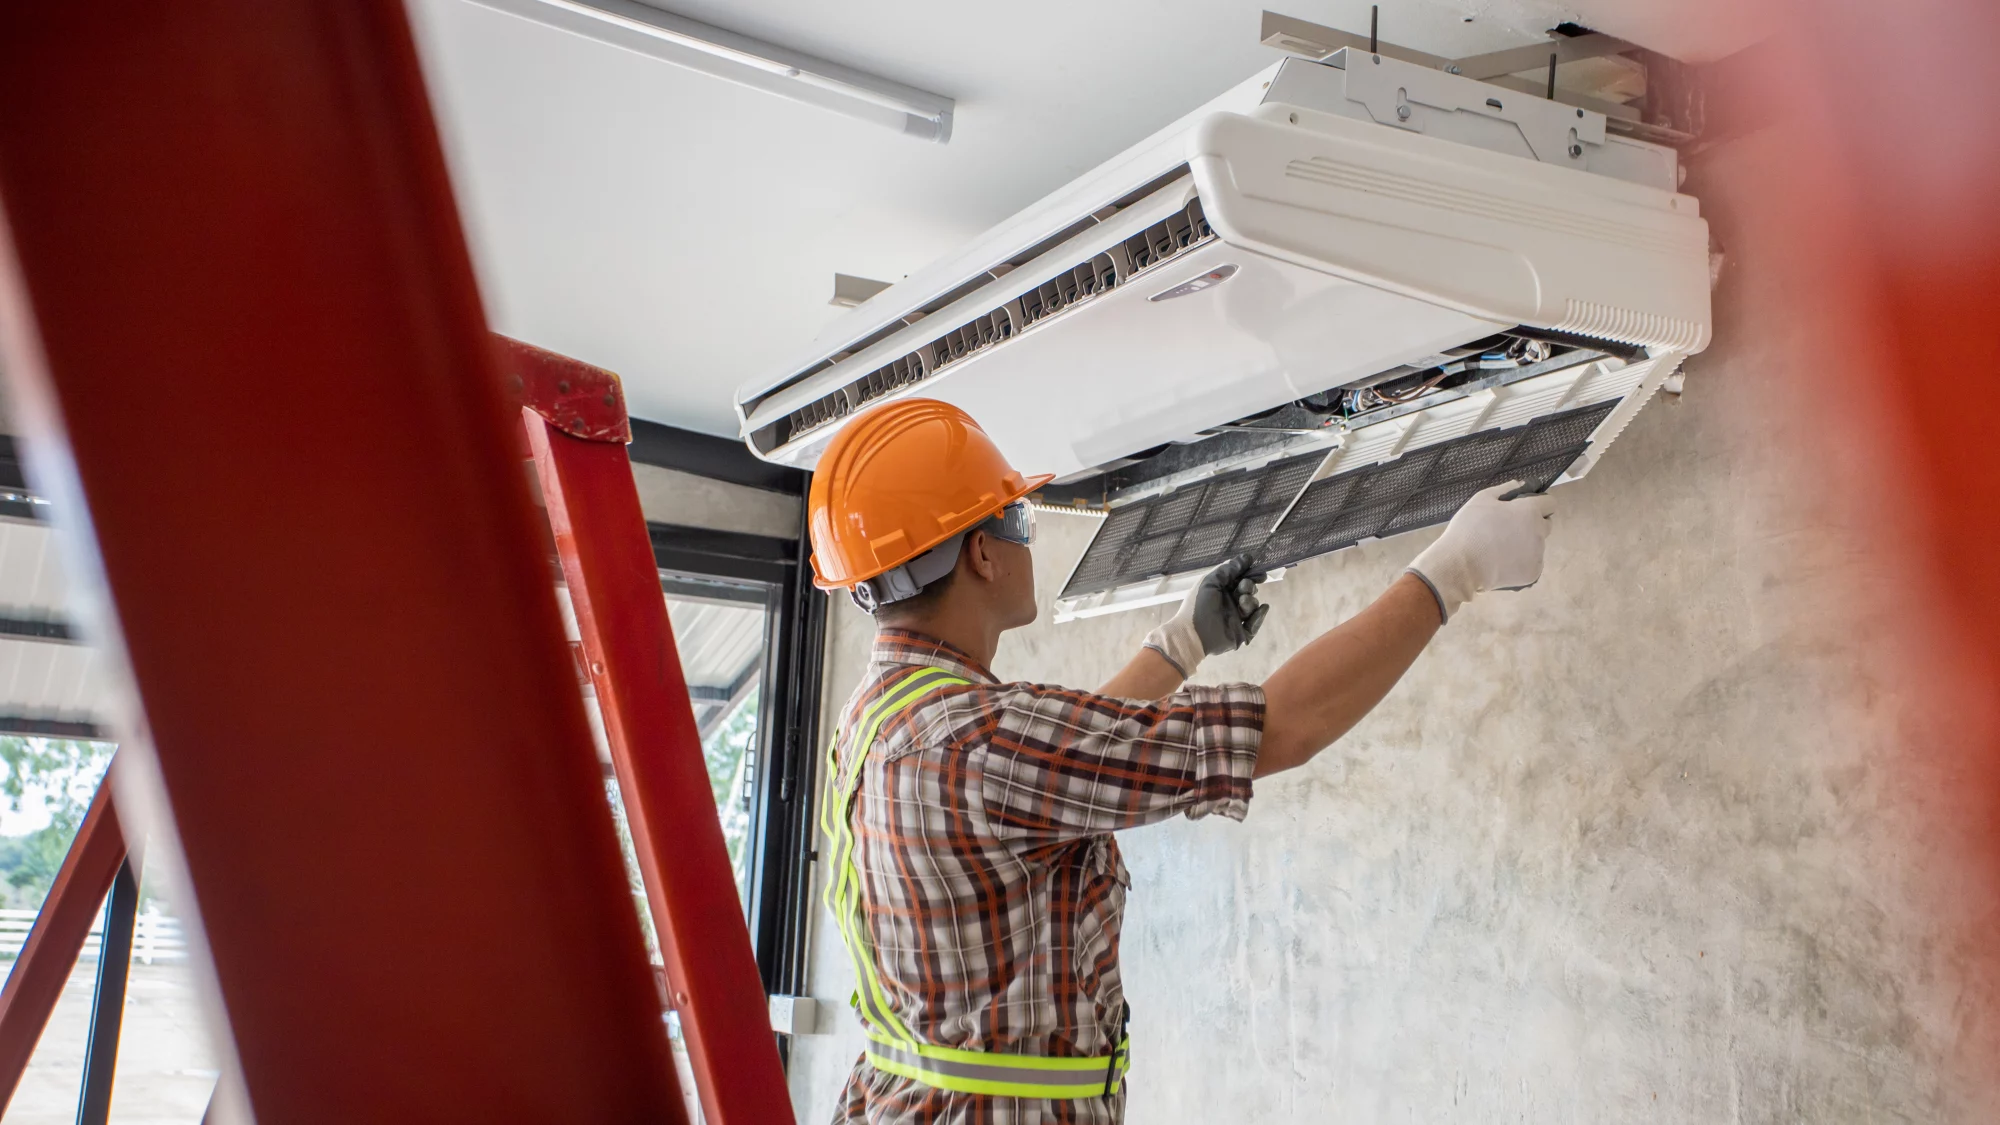 image with a men mounting a new split system of water cooled air conditioning ceiling mounted unit and checking the filters before first start. Man is with a construct ppe hat and installation is in a new constructed commercial building.